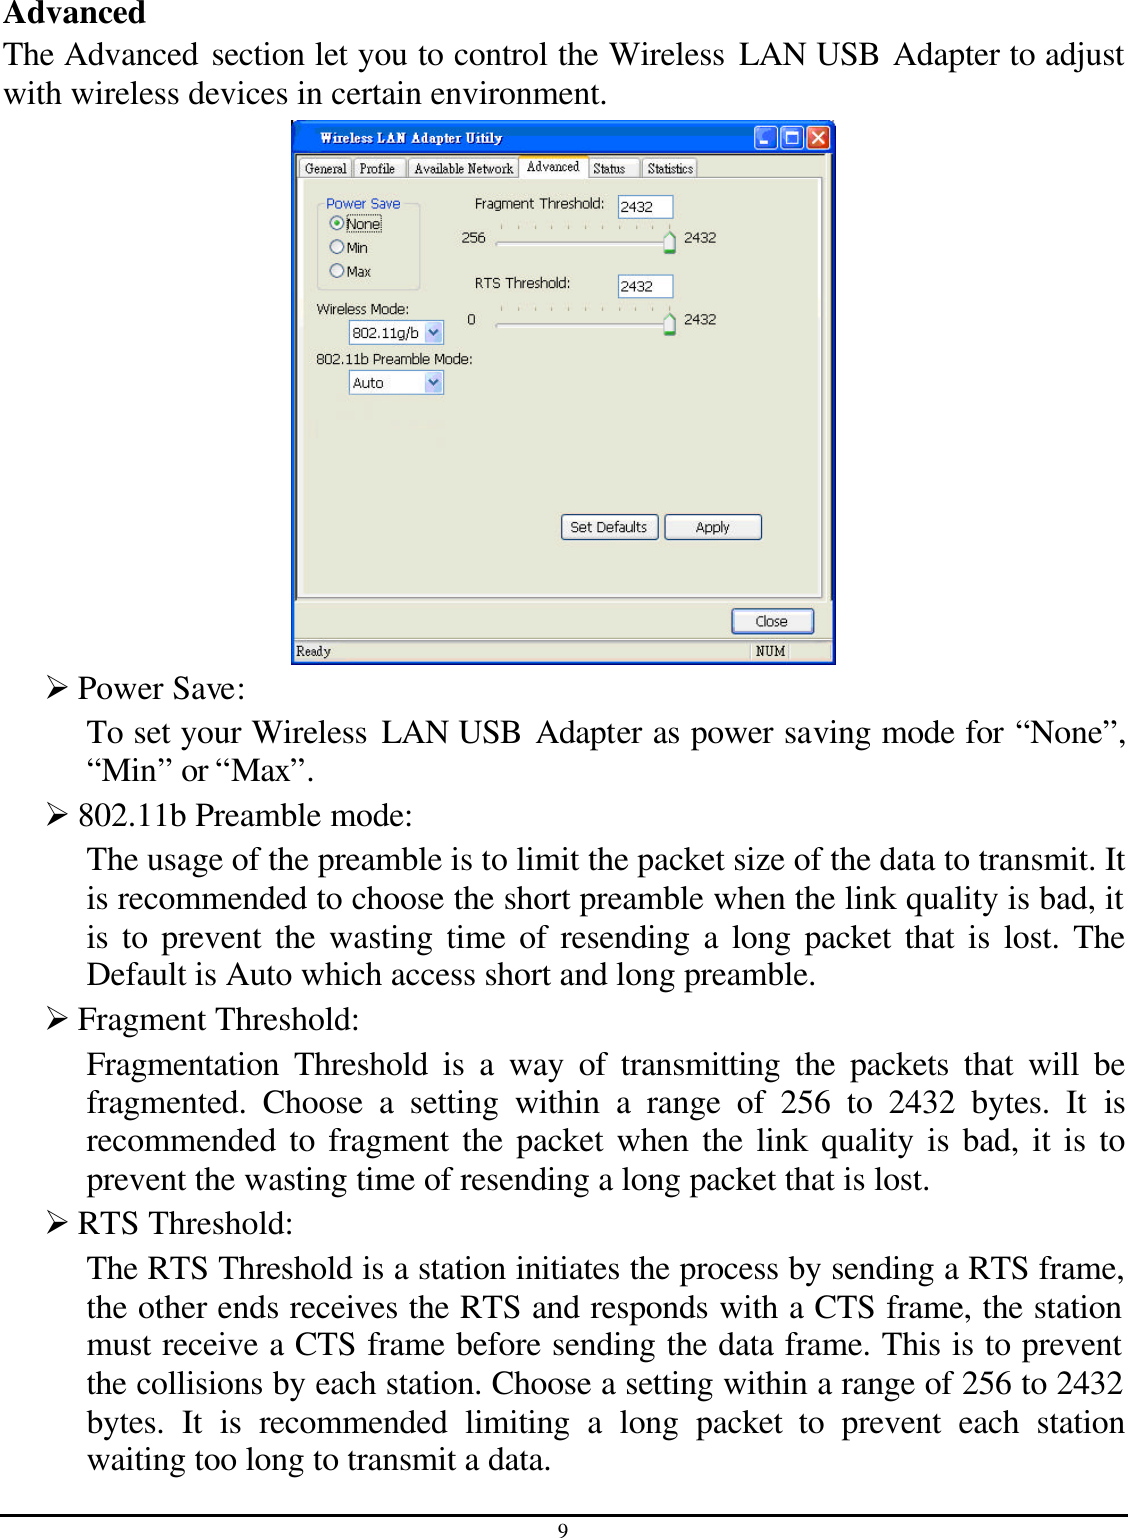 9  Advanced The Advanced section let you to control the Wireless LAN USB Adapter to adjust with wireless devices in certain environment.  Ø Power Save: To set your Wireless LAN USB Adapter as power saving mode for “None”, “Min” or “Max”. Ø 802.11b Preamble mode: The usage of the preamble is to limit the packet size of the data to transmit. It is recommended to choose the short preamble when the link quality is bad, it is to prevent the wasting time of resending a long packet that is lost. The Default is Auto which access short and long preamble. Ø Fragment Threshold: Fragmentation Threshold is a way of transmitting the packets that will be fragmented. Choose a setting within a range of 256 to 2432 bytes. It is recommended to fragment the packet when the link quality is bad, it is to prevent the wasting time of resending a long packet that is lost. Ø RTS Threshold: The RTS Threshold is a station initiates the process by sending a RTS frame, the other ends receives the RTS and responds with a CTS frame, the station must receive a CTS frame before sending the data frame. This is to prevent the collisions by each station. Choose a setting within a range of 256 to 2432 bytes. It is recommended limiting a long packet to prevent each station waiting too long to transmit a data. 